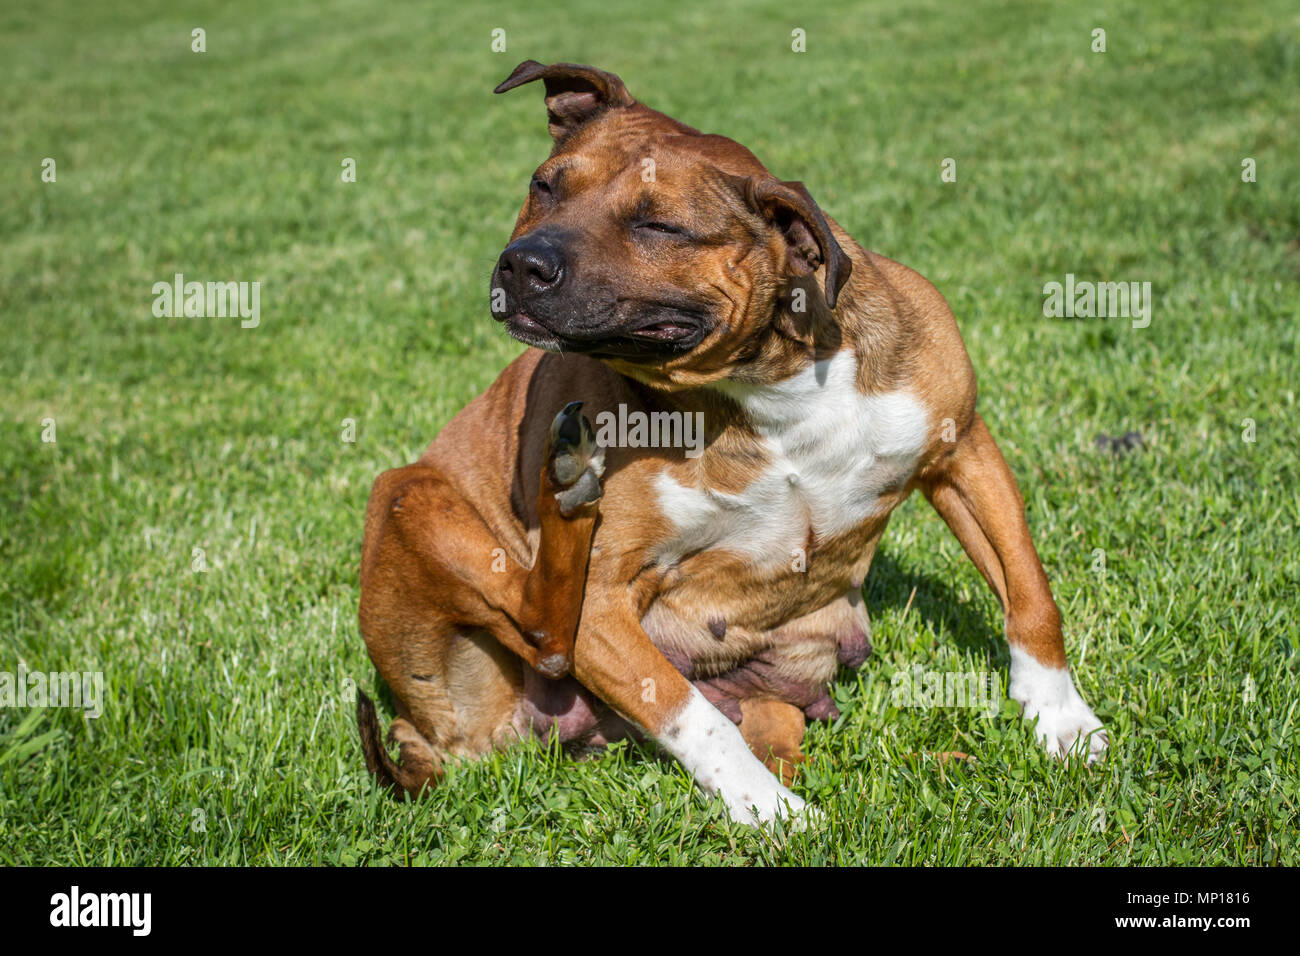 Gravid female dog sitting on a meadow Stock Photo